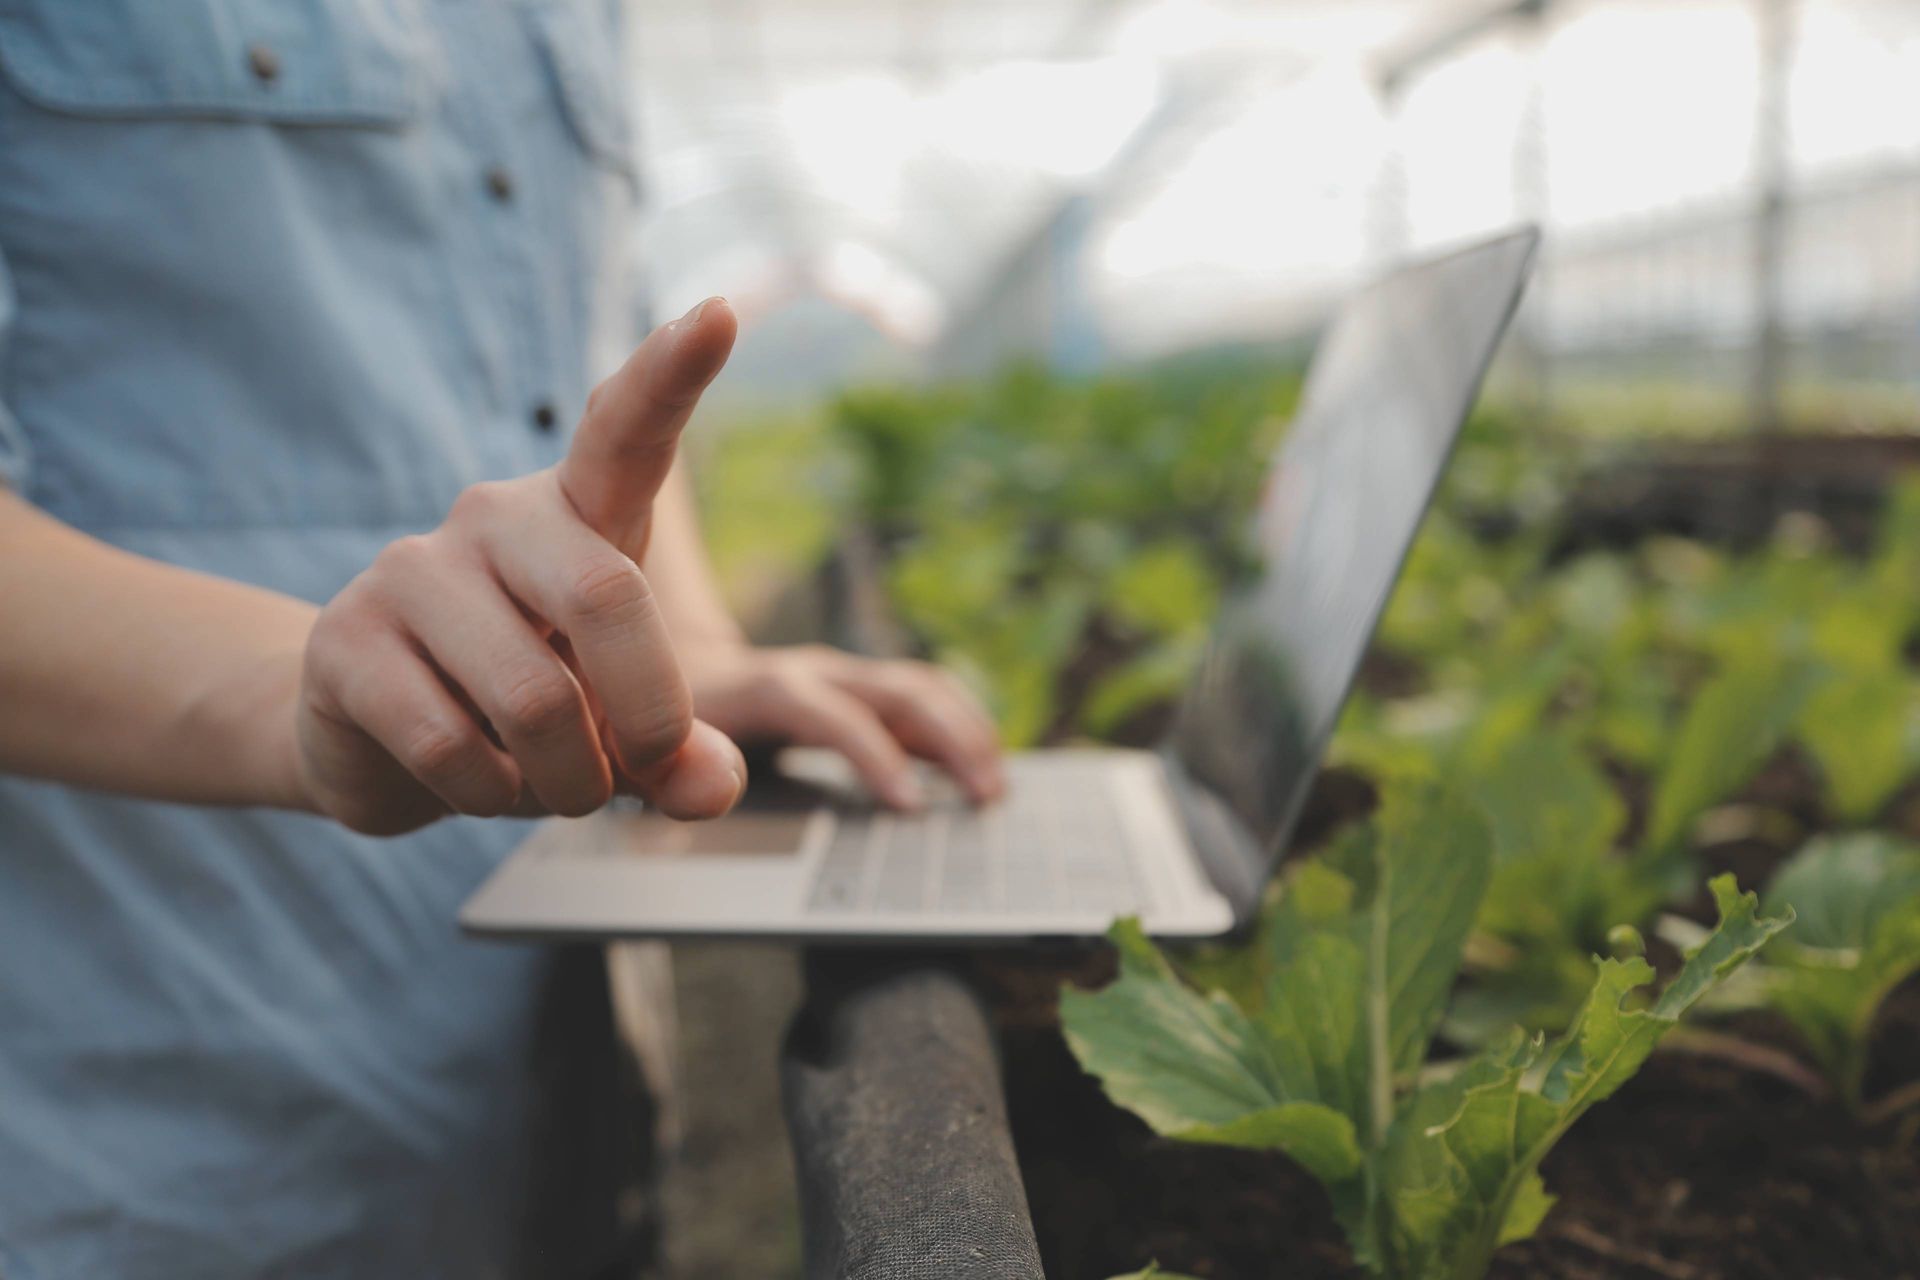 Image of a fruit and vegetable producer downloading a digital checklist